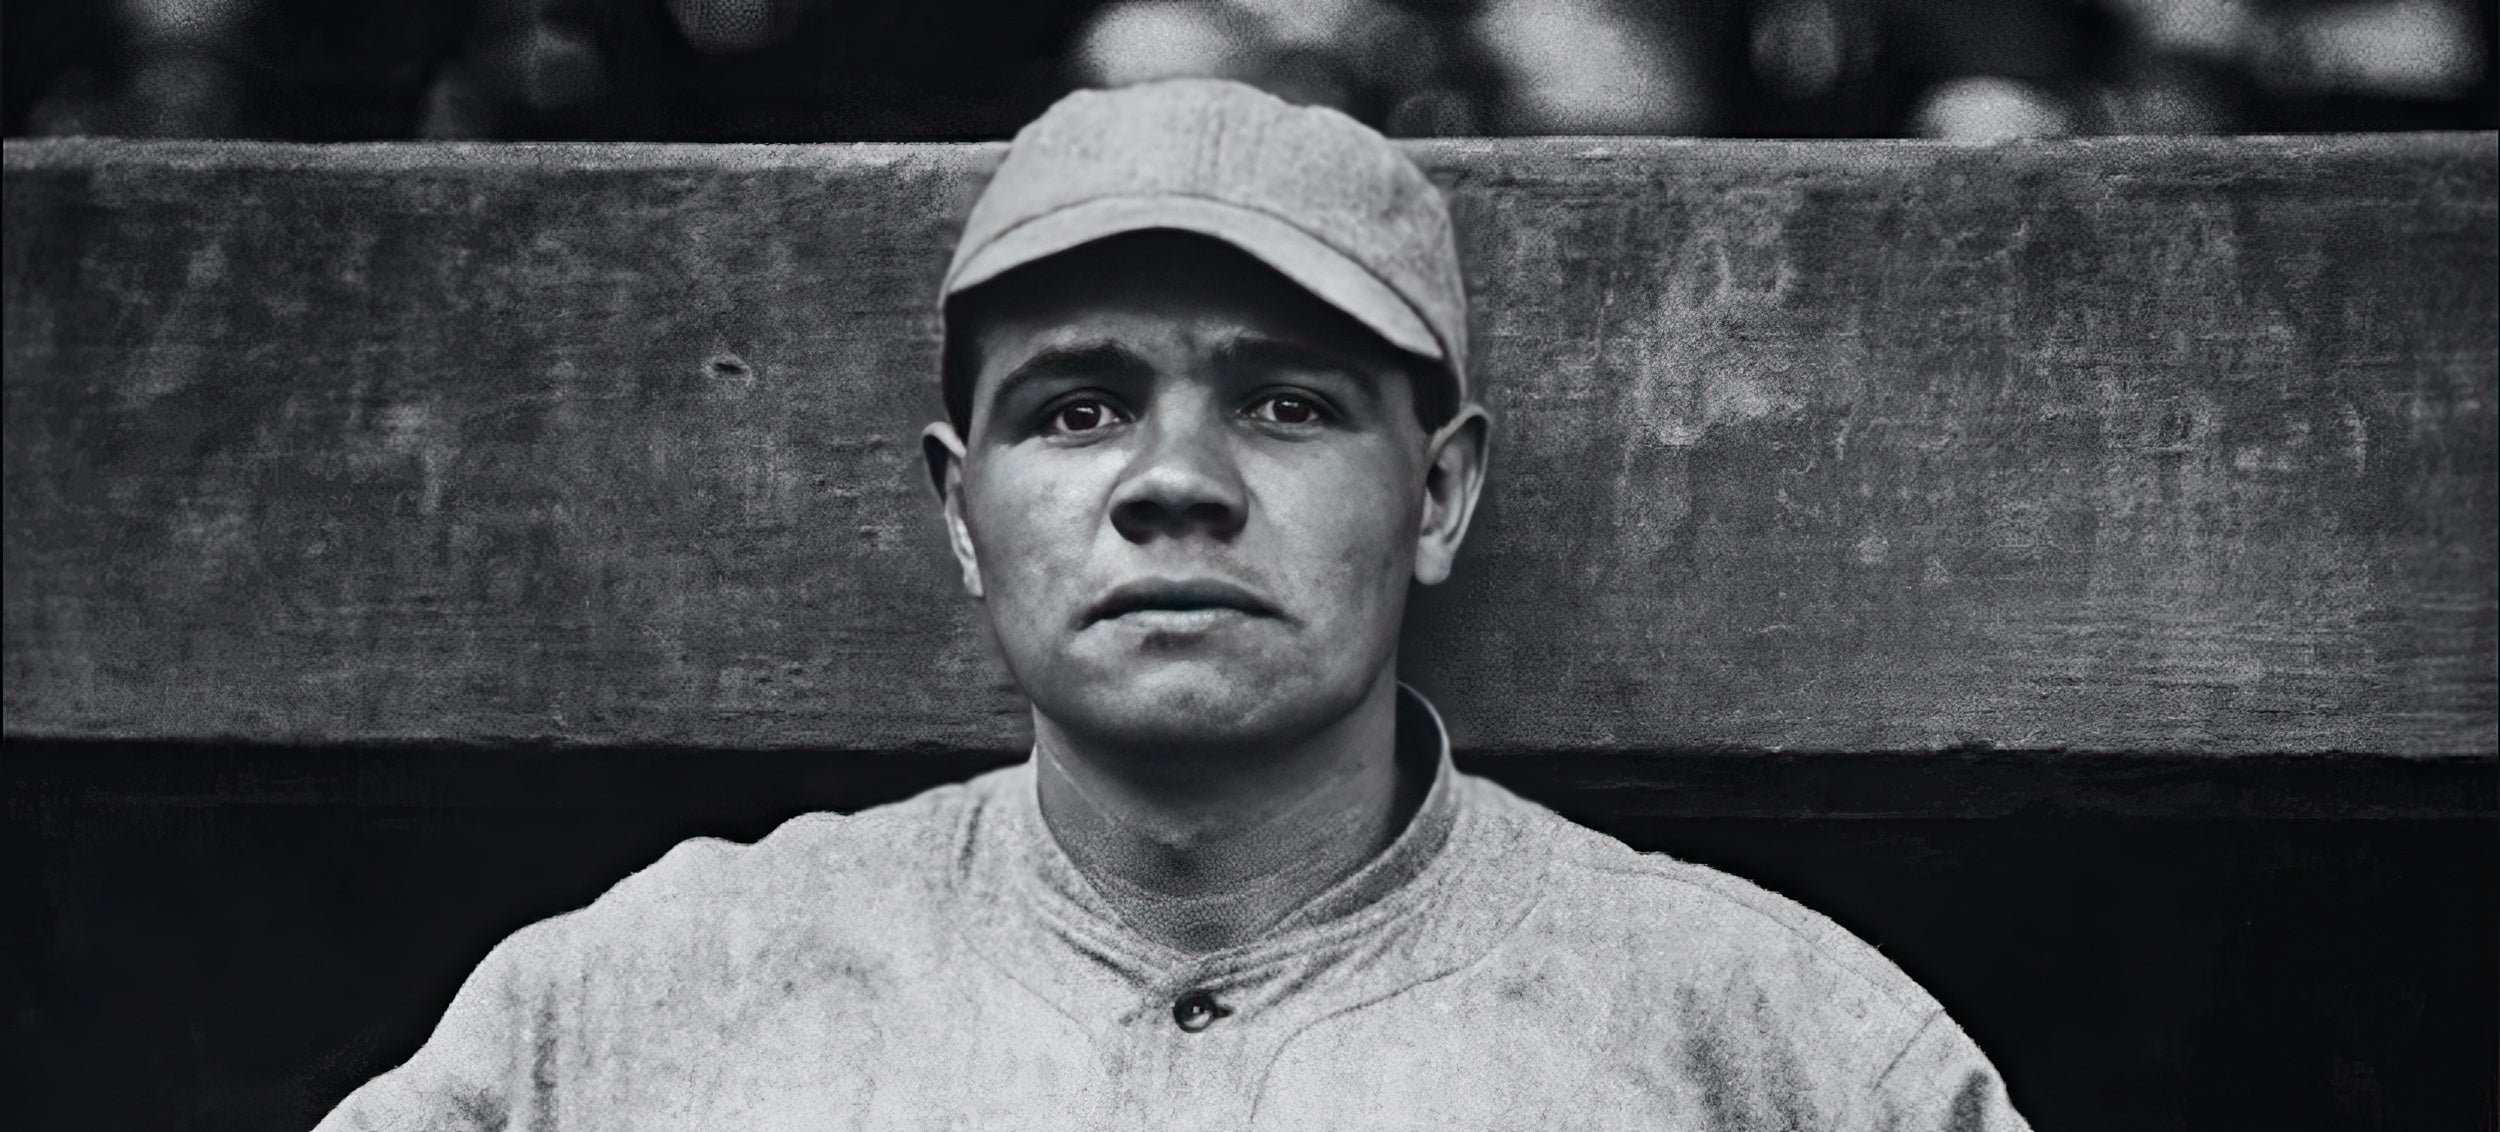 Science Explains Babe Ruth's Home Runs - Image of Babe Ruth